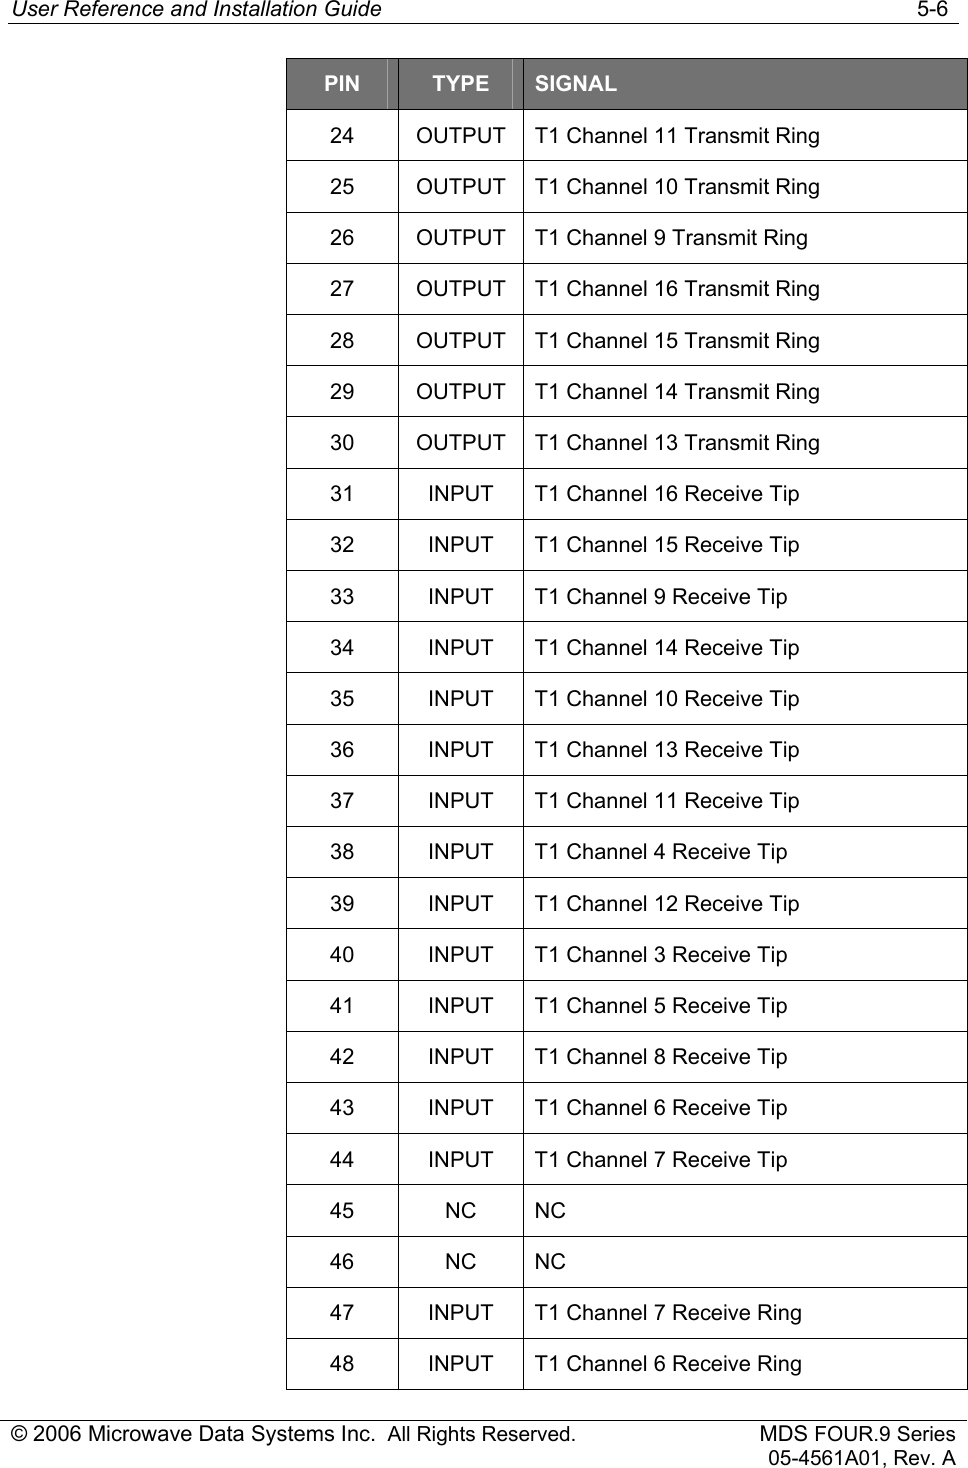 User Reference and Installation Guide   5-6 © 2006 Microwave Data Systems Inc.  All Rights Reserved. MDS FOUR.9 Series 05-4561A01, Rev. A  PIN  TYPE  SIGNAL   24  OUTPUT  T1 Channel 11 Transmit Ring   25  OUTPUT  T1 Channel 10 Transmit Ring   26  OUTPUT  T1 Channel 9 Transmit Ring   27  OUTPUT  T1 Channel 16 Transmit Ring   28  OUTPUT  T1 Channel 15 Transmit Ring   29  OUTPUT  T1 Channel 14 Transmit Ring   30  OUTPUT  T1 Channel 13 Transmit Ring   31  INPUT  T1 Channel 16 Receive Tip   32  INPUT  T1 Channel 15 Receive Tip   33  INPUT  T1 Channel 9 Receive Tip   34  INPUT  T1 Channel 14 Receive Tip   35  INPUT  T1 Channel 10 Receive Tip   36  INPUT  T1 Channel 13 Receive Tip   37  INPUT  T1 Channel 11 Receive Tip   38  INPUT  T1 Channel 4 Receive Tip   39  INPUT  T1 Channel 12 Receive Tip   40  INPUT  T1 Channel 3 Receive Tip   41  INPUT  T1 Channel 5 Receive Tip   42  INPUT  T1 Channel 8 Receive Tip   43  INPUT  T1 Channel 6 Receive Tip   44  INPUT  T1 Channel 7 Receive Tip  45 NC NC  46 NC NC   47  INPUT  T1 Channel 7 Receive Ring   48  INPUT  T1 Channel 6 Receive Ring 